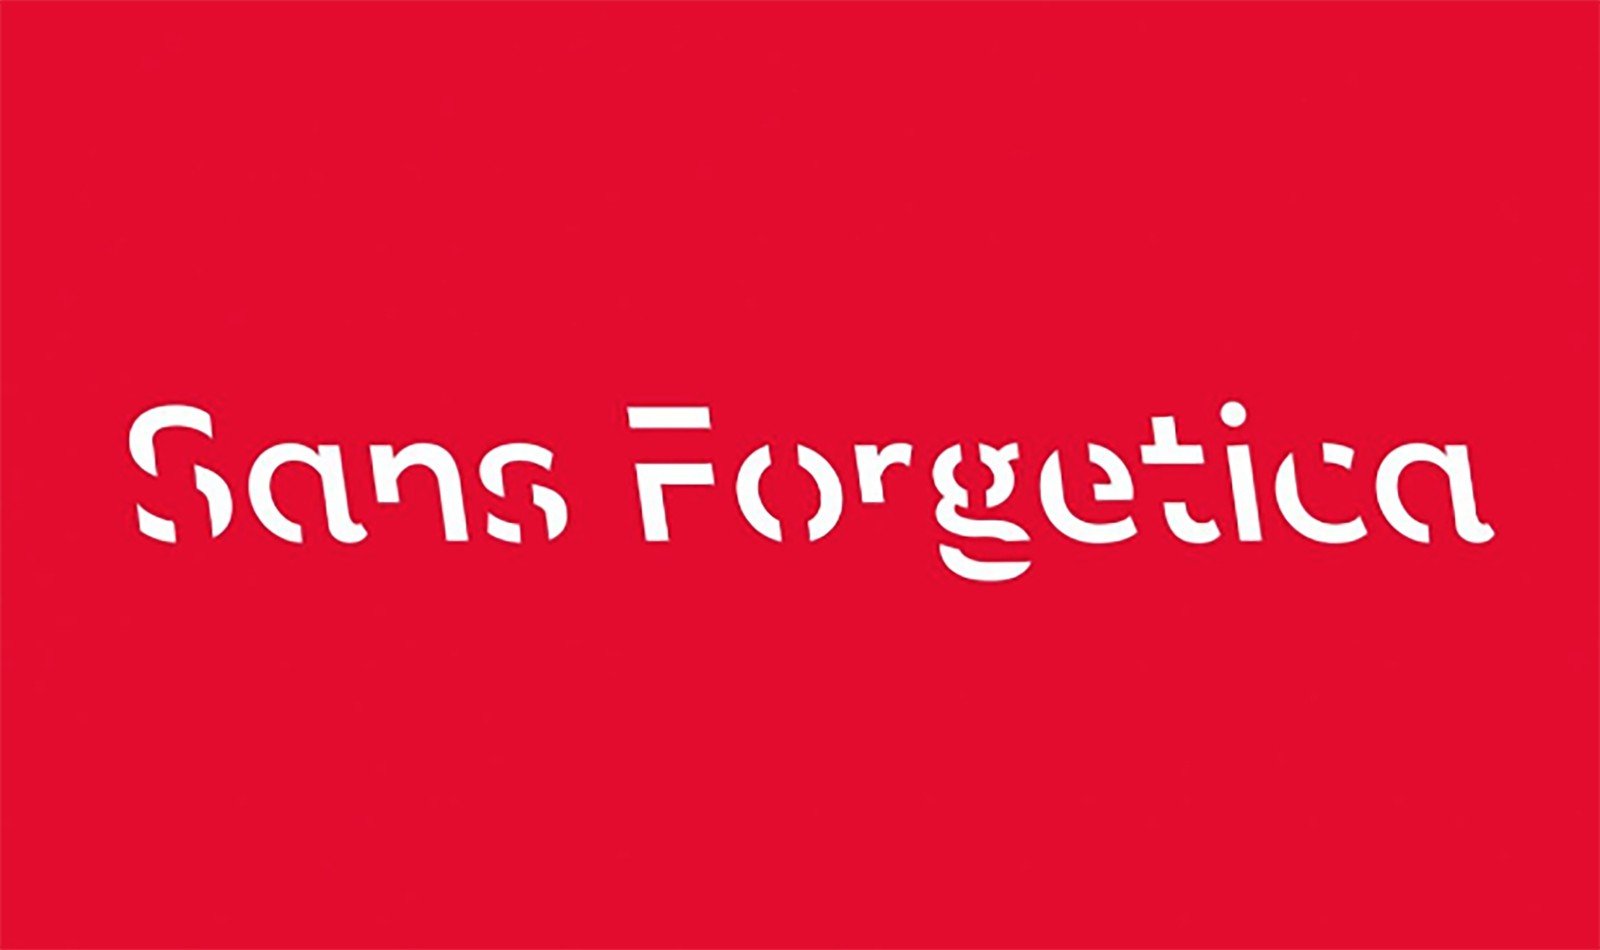 sans forgetica